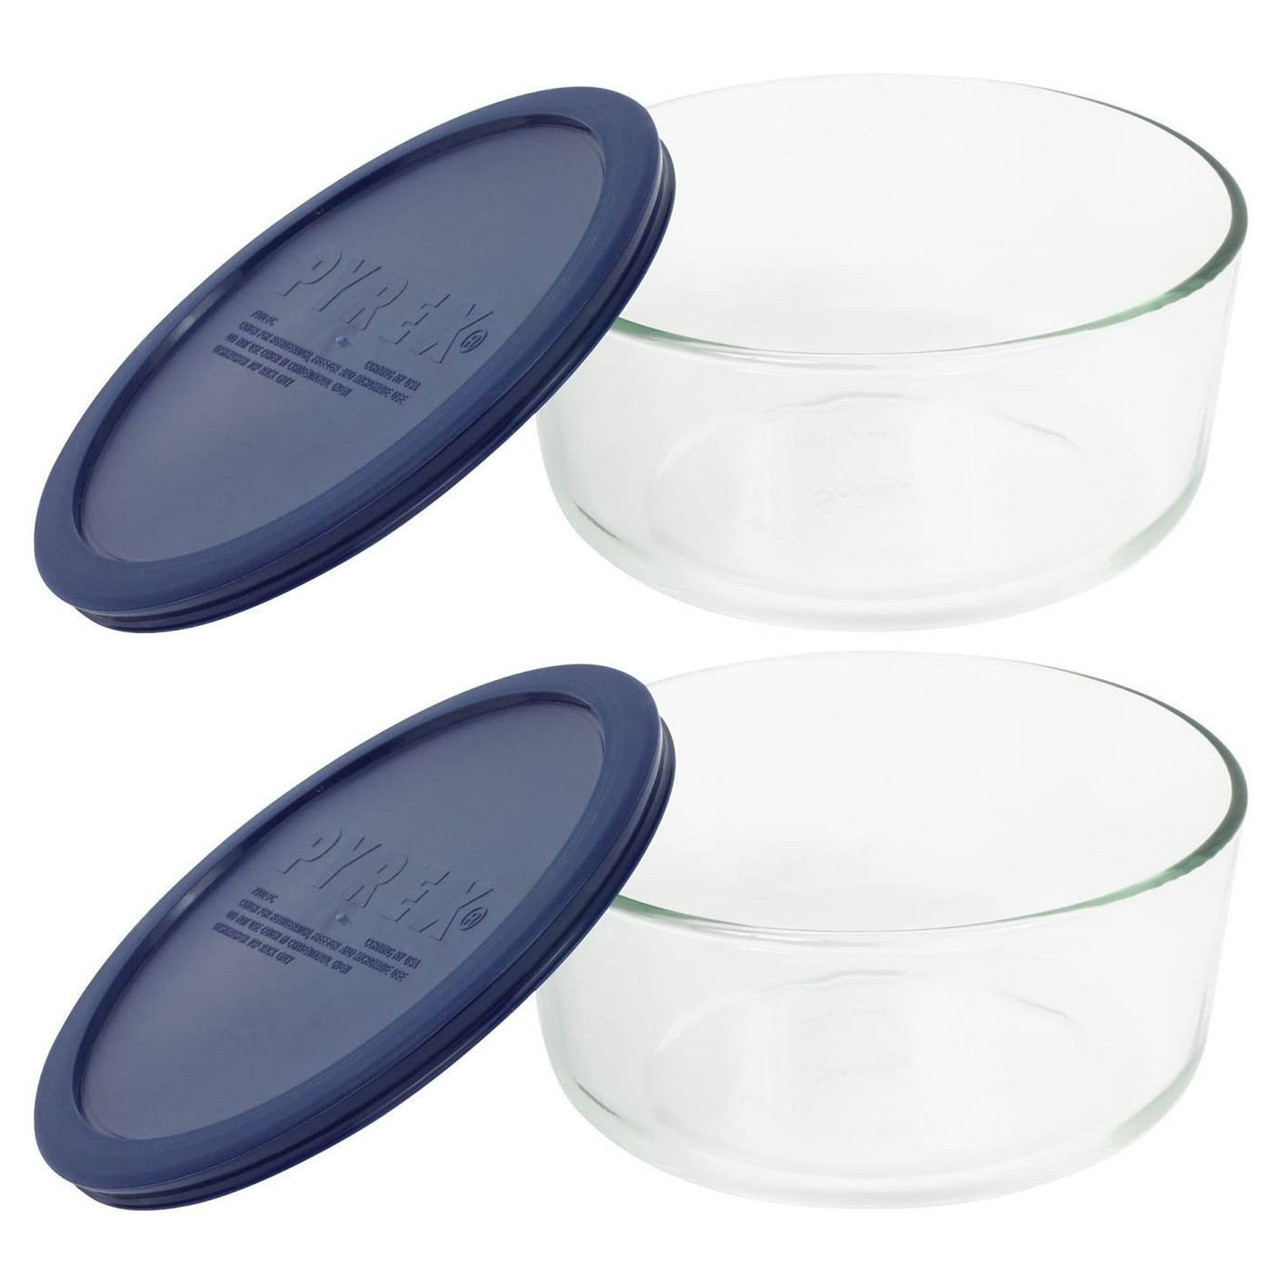 Pyrex 7201 4-Cup Round Glass Food Storage Bowl w/ 7201-PC 4-Cup Surf Blue Lid Cover